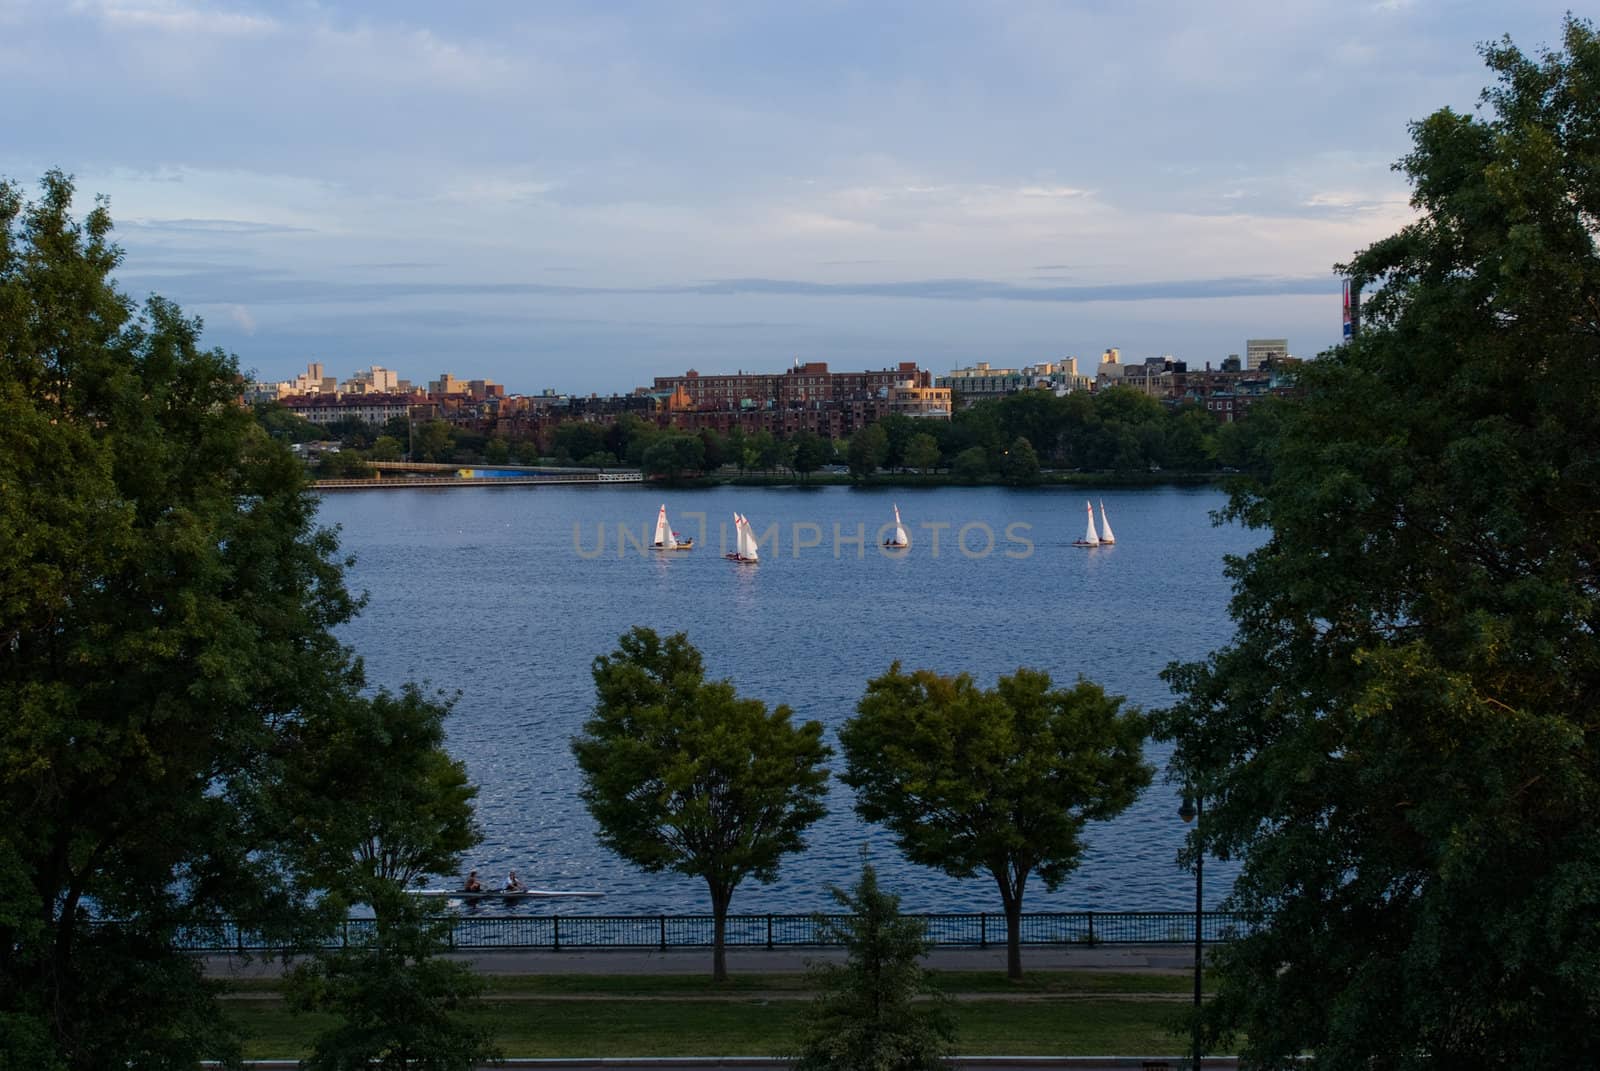 Sailboats and a crew shell on the Charles River